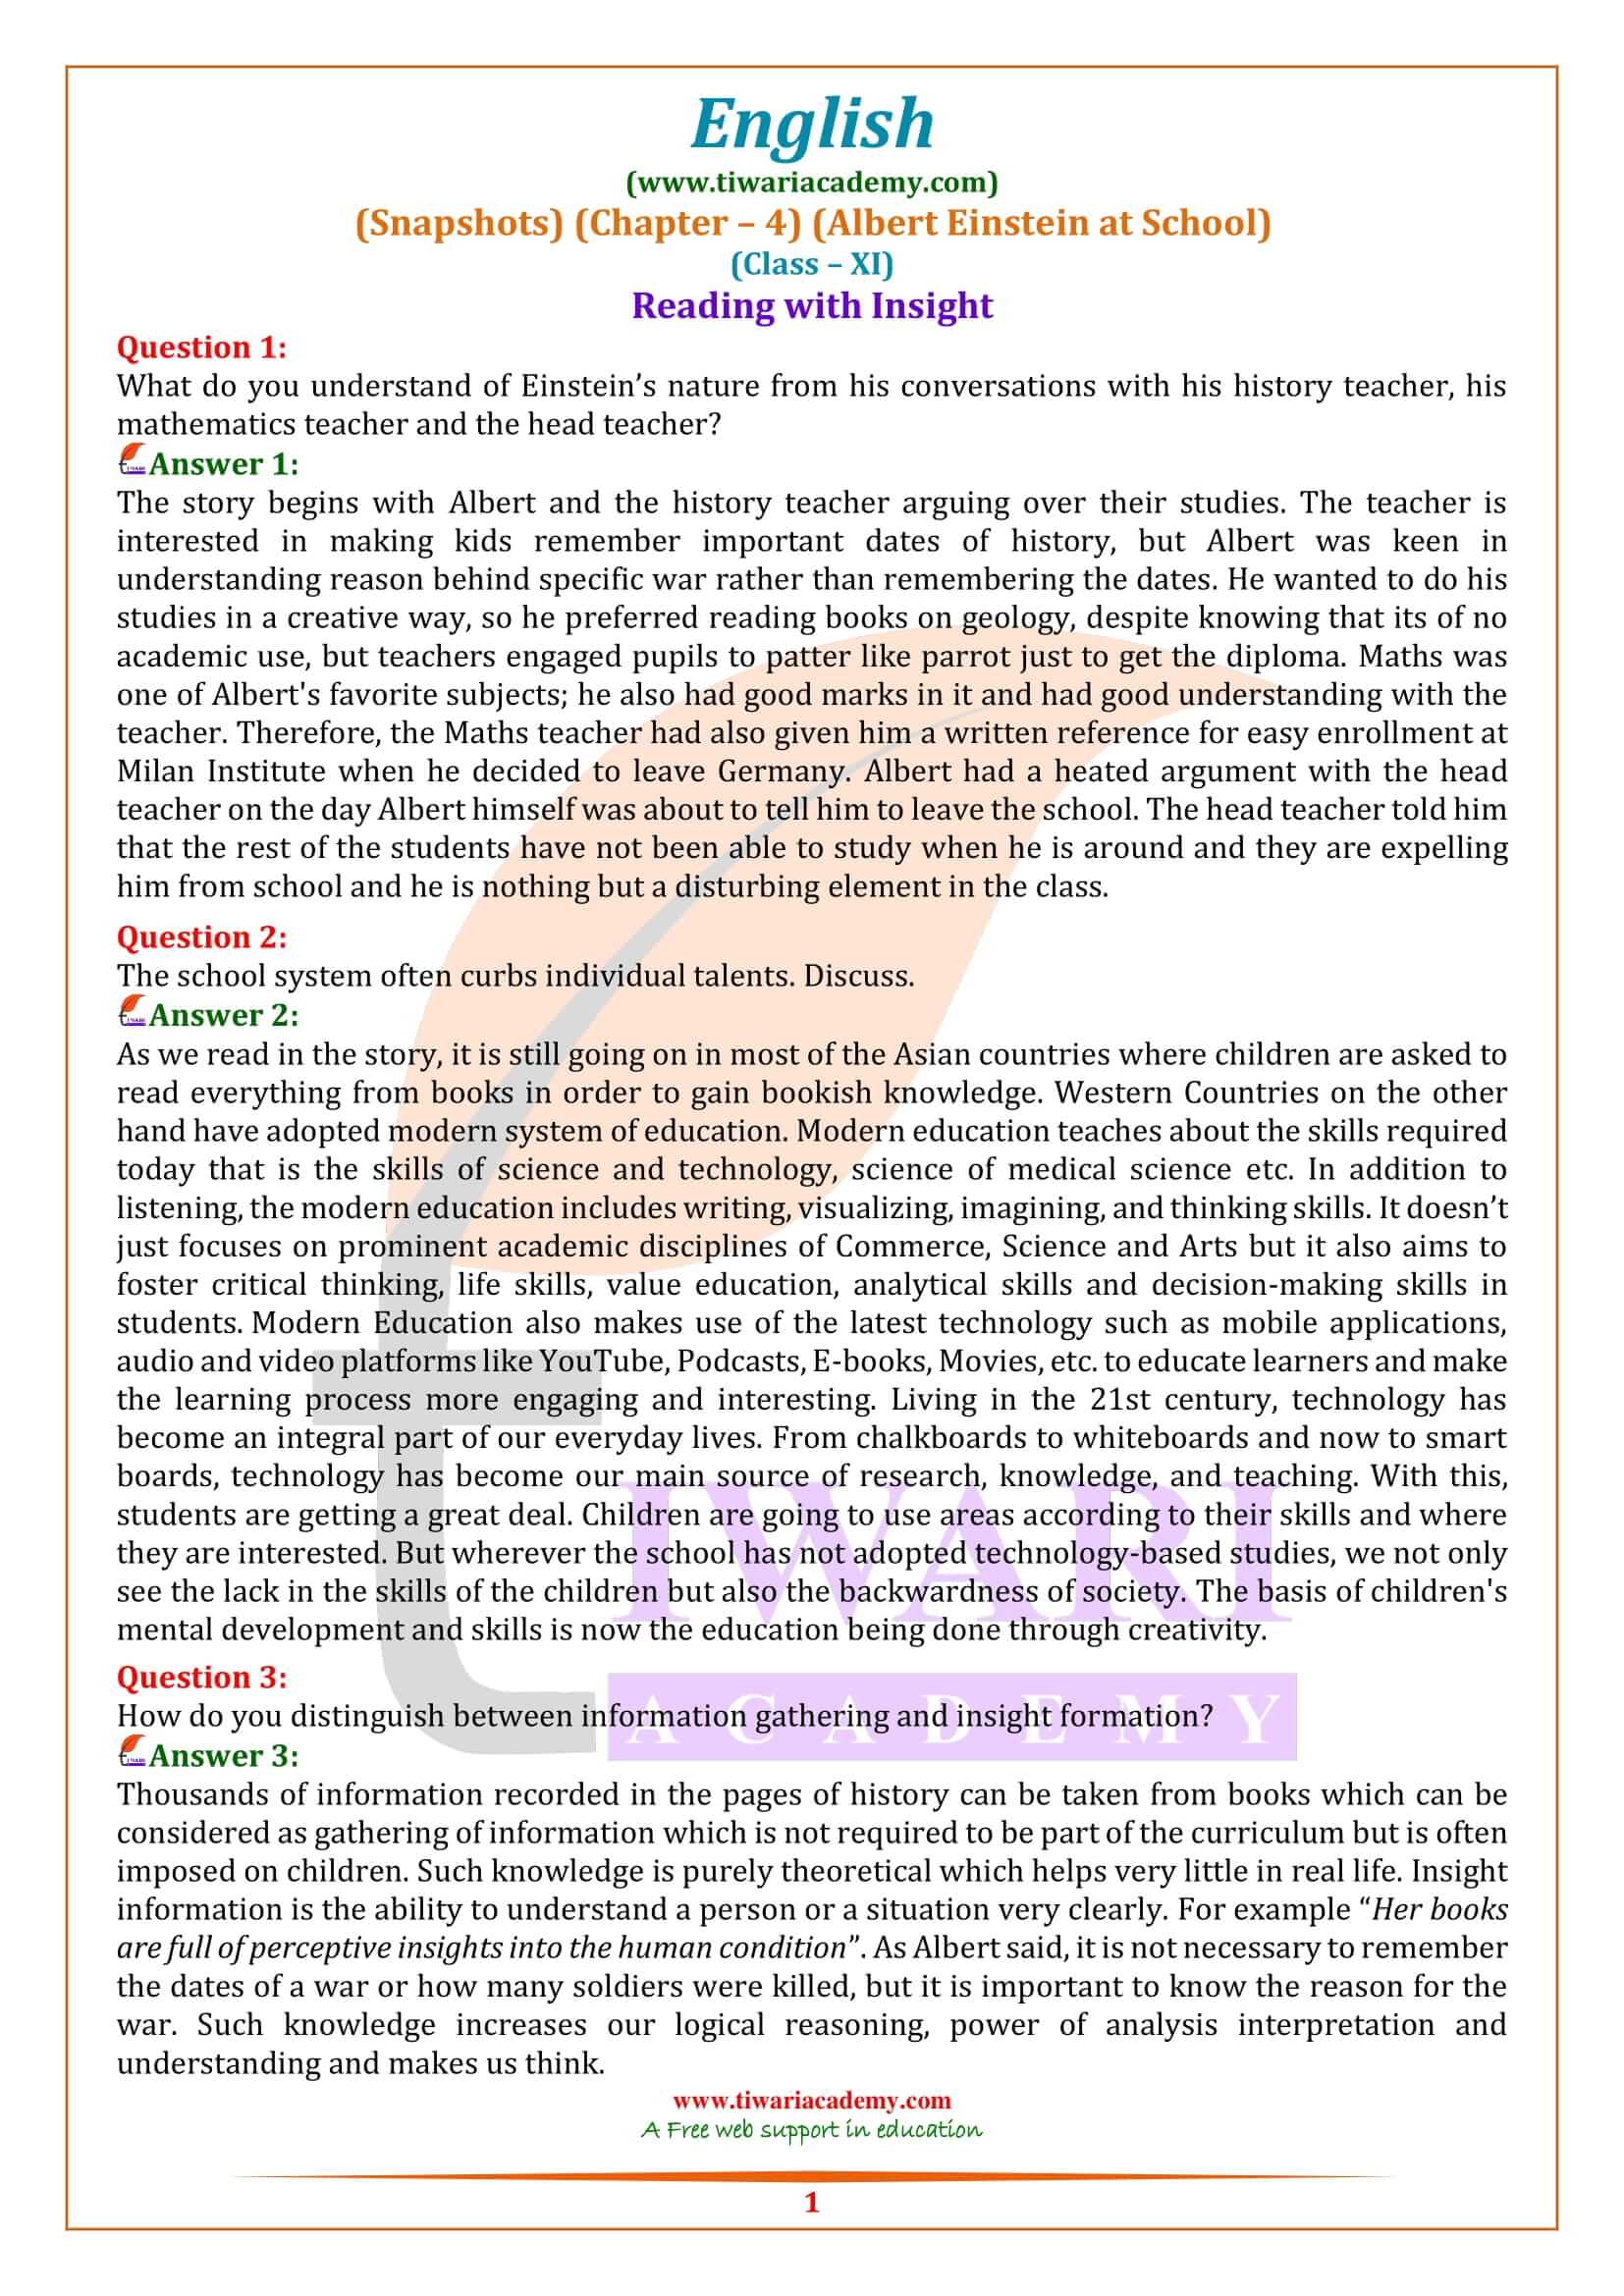 NCERT Solutions for Class 11 English Snapshots Chapter 4